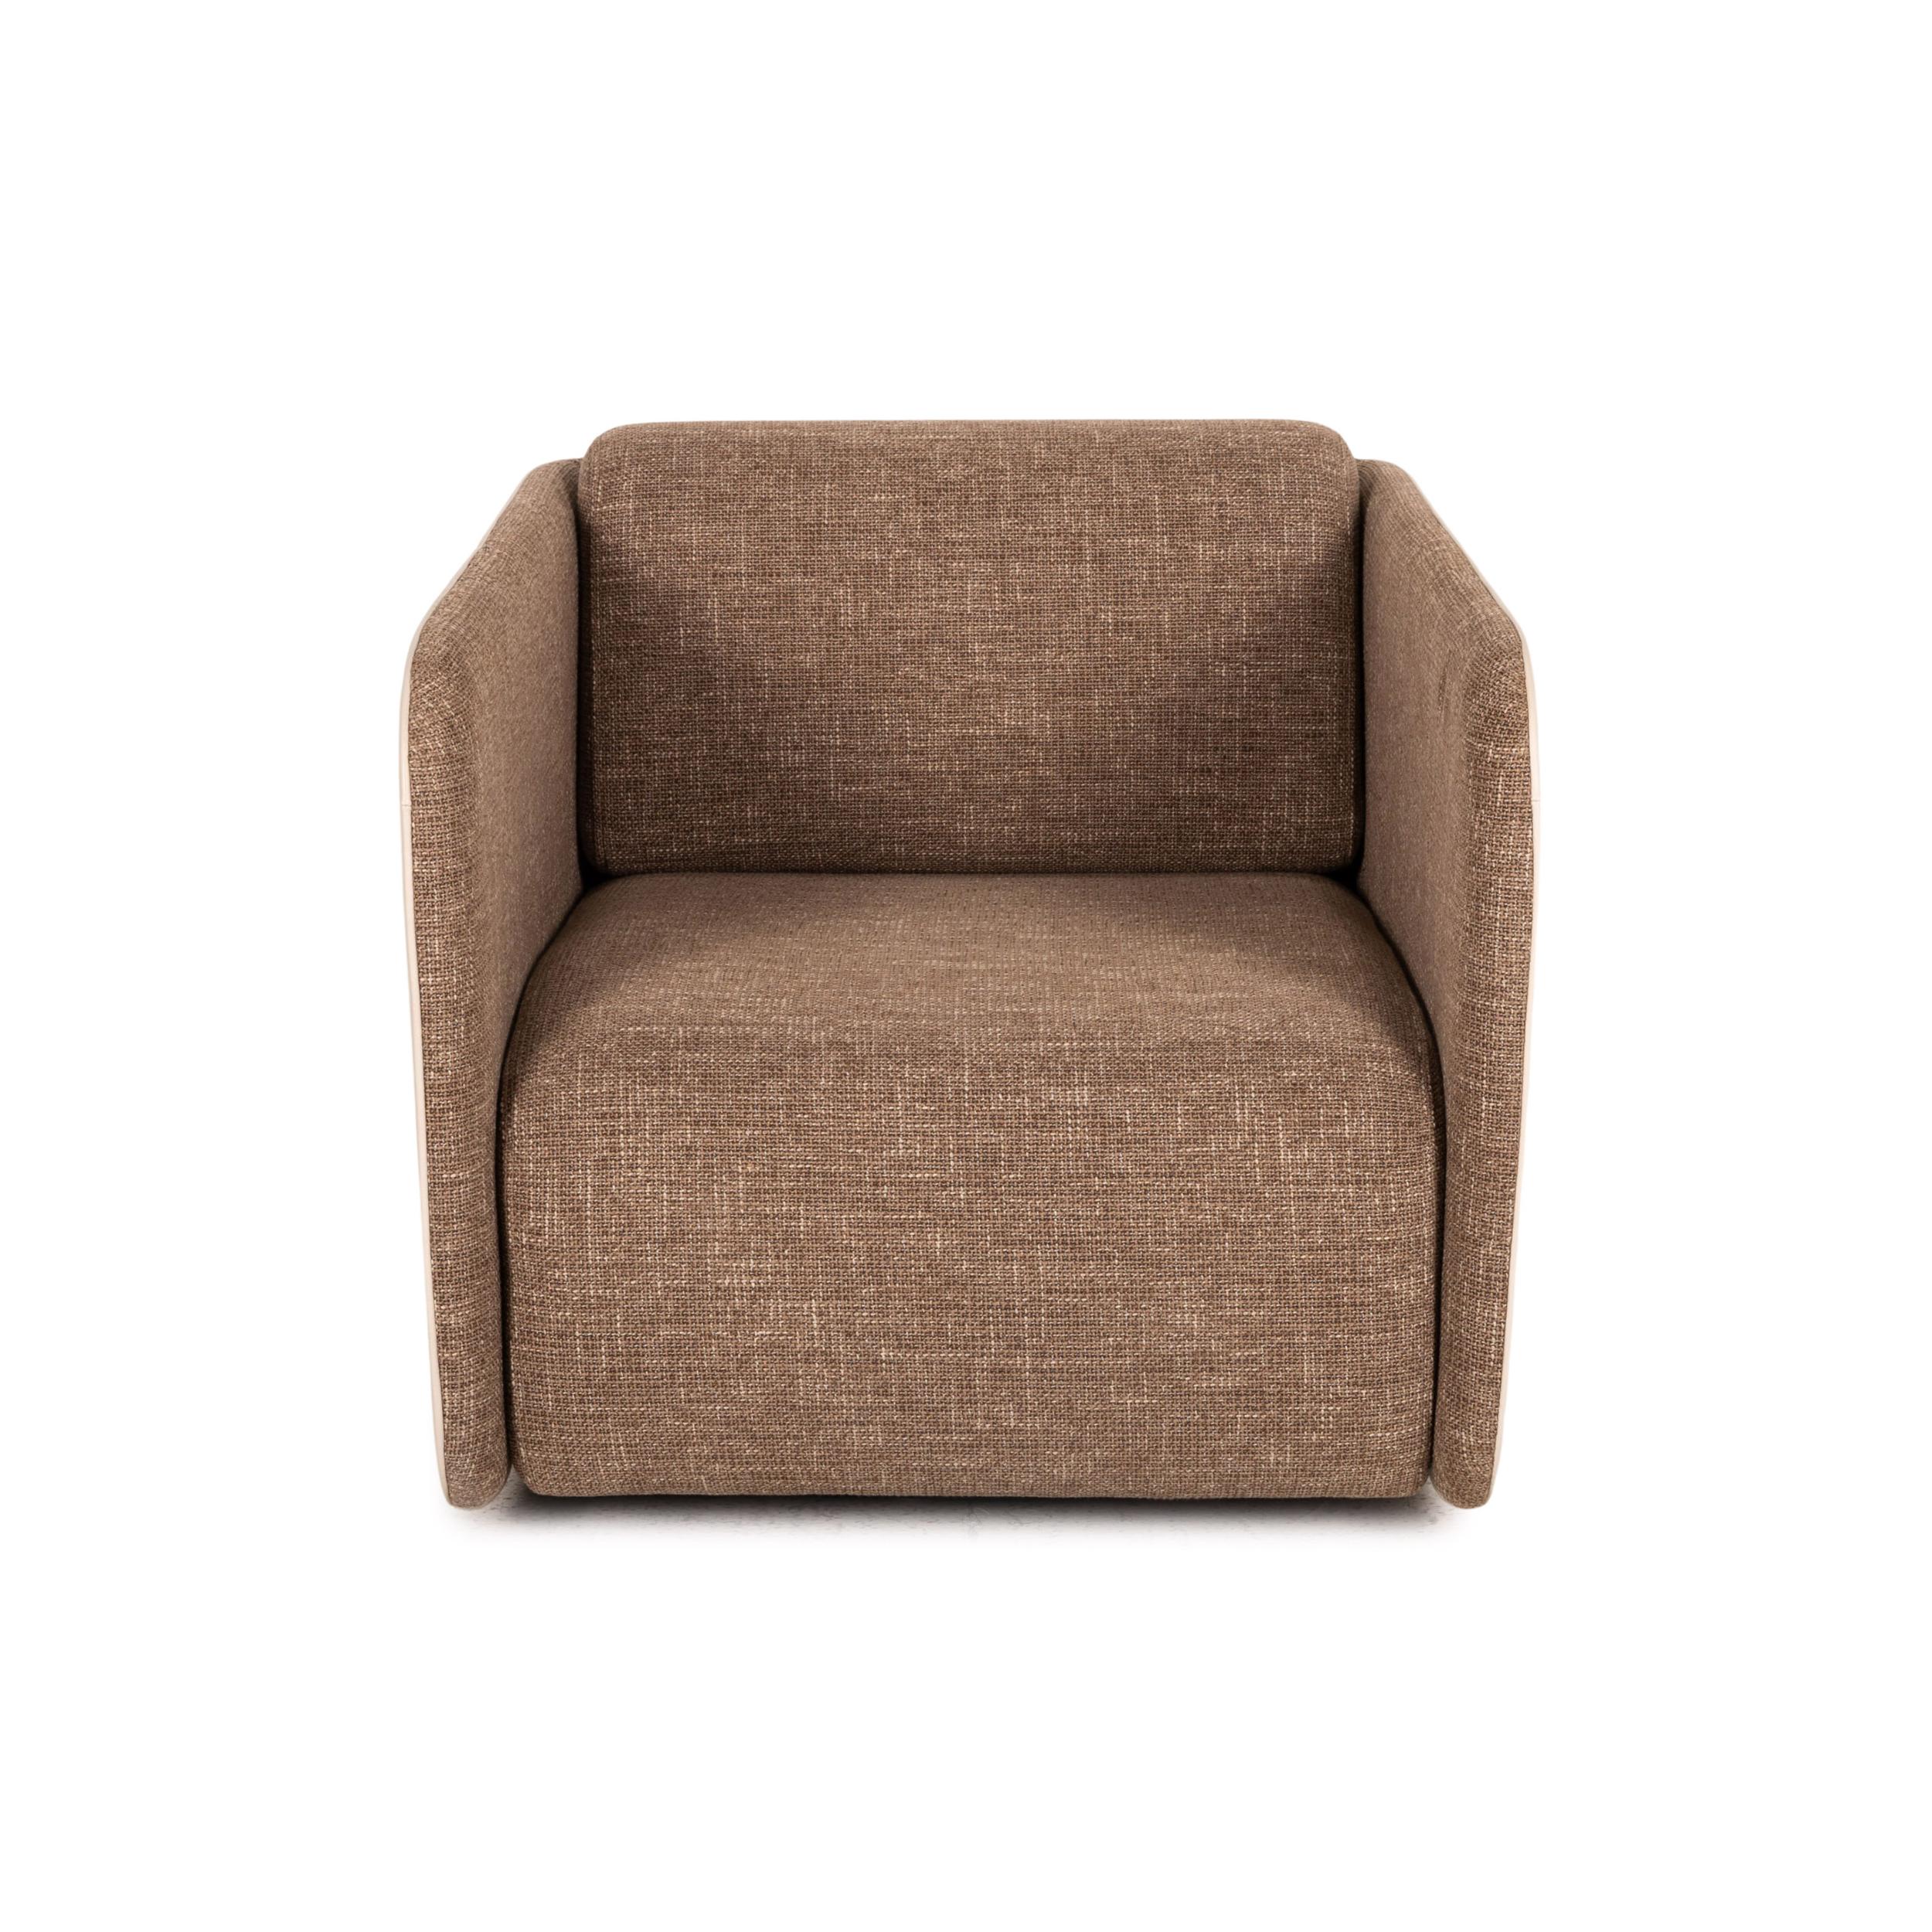 Contemporary Rolf Benz 6900 Fabric Leather Armchair Cream Brown Function Swivel Armchair For Sale